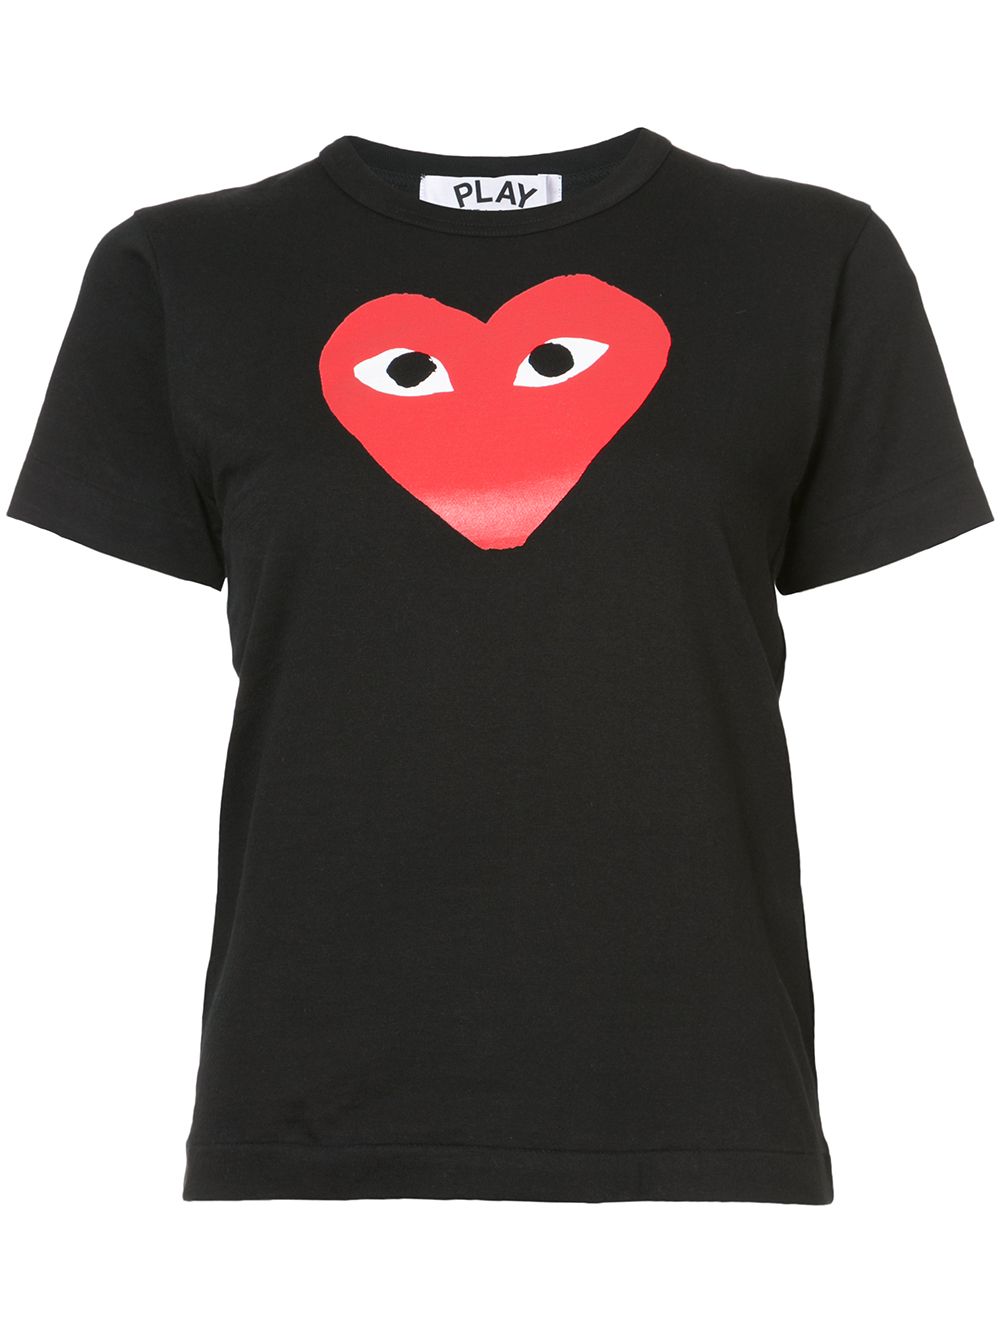 Crew-neck T-shirt in black with red heart print